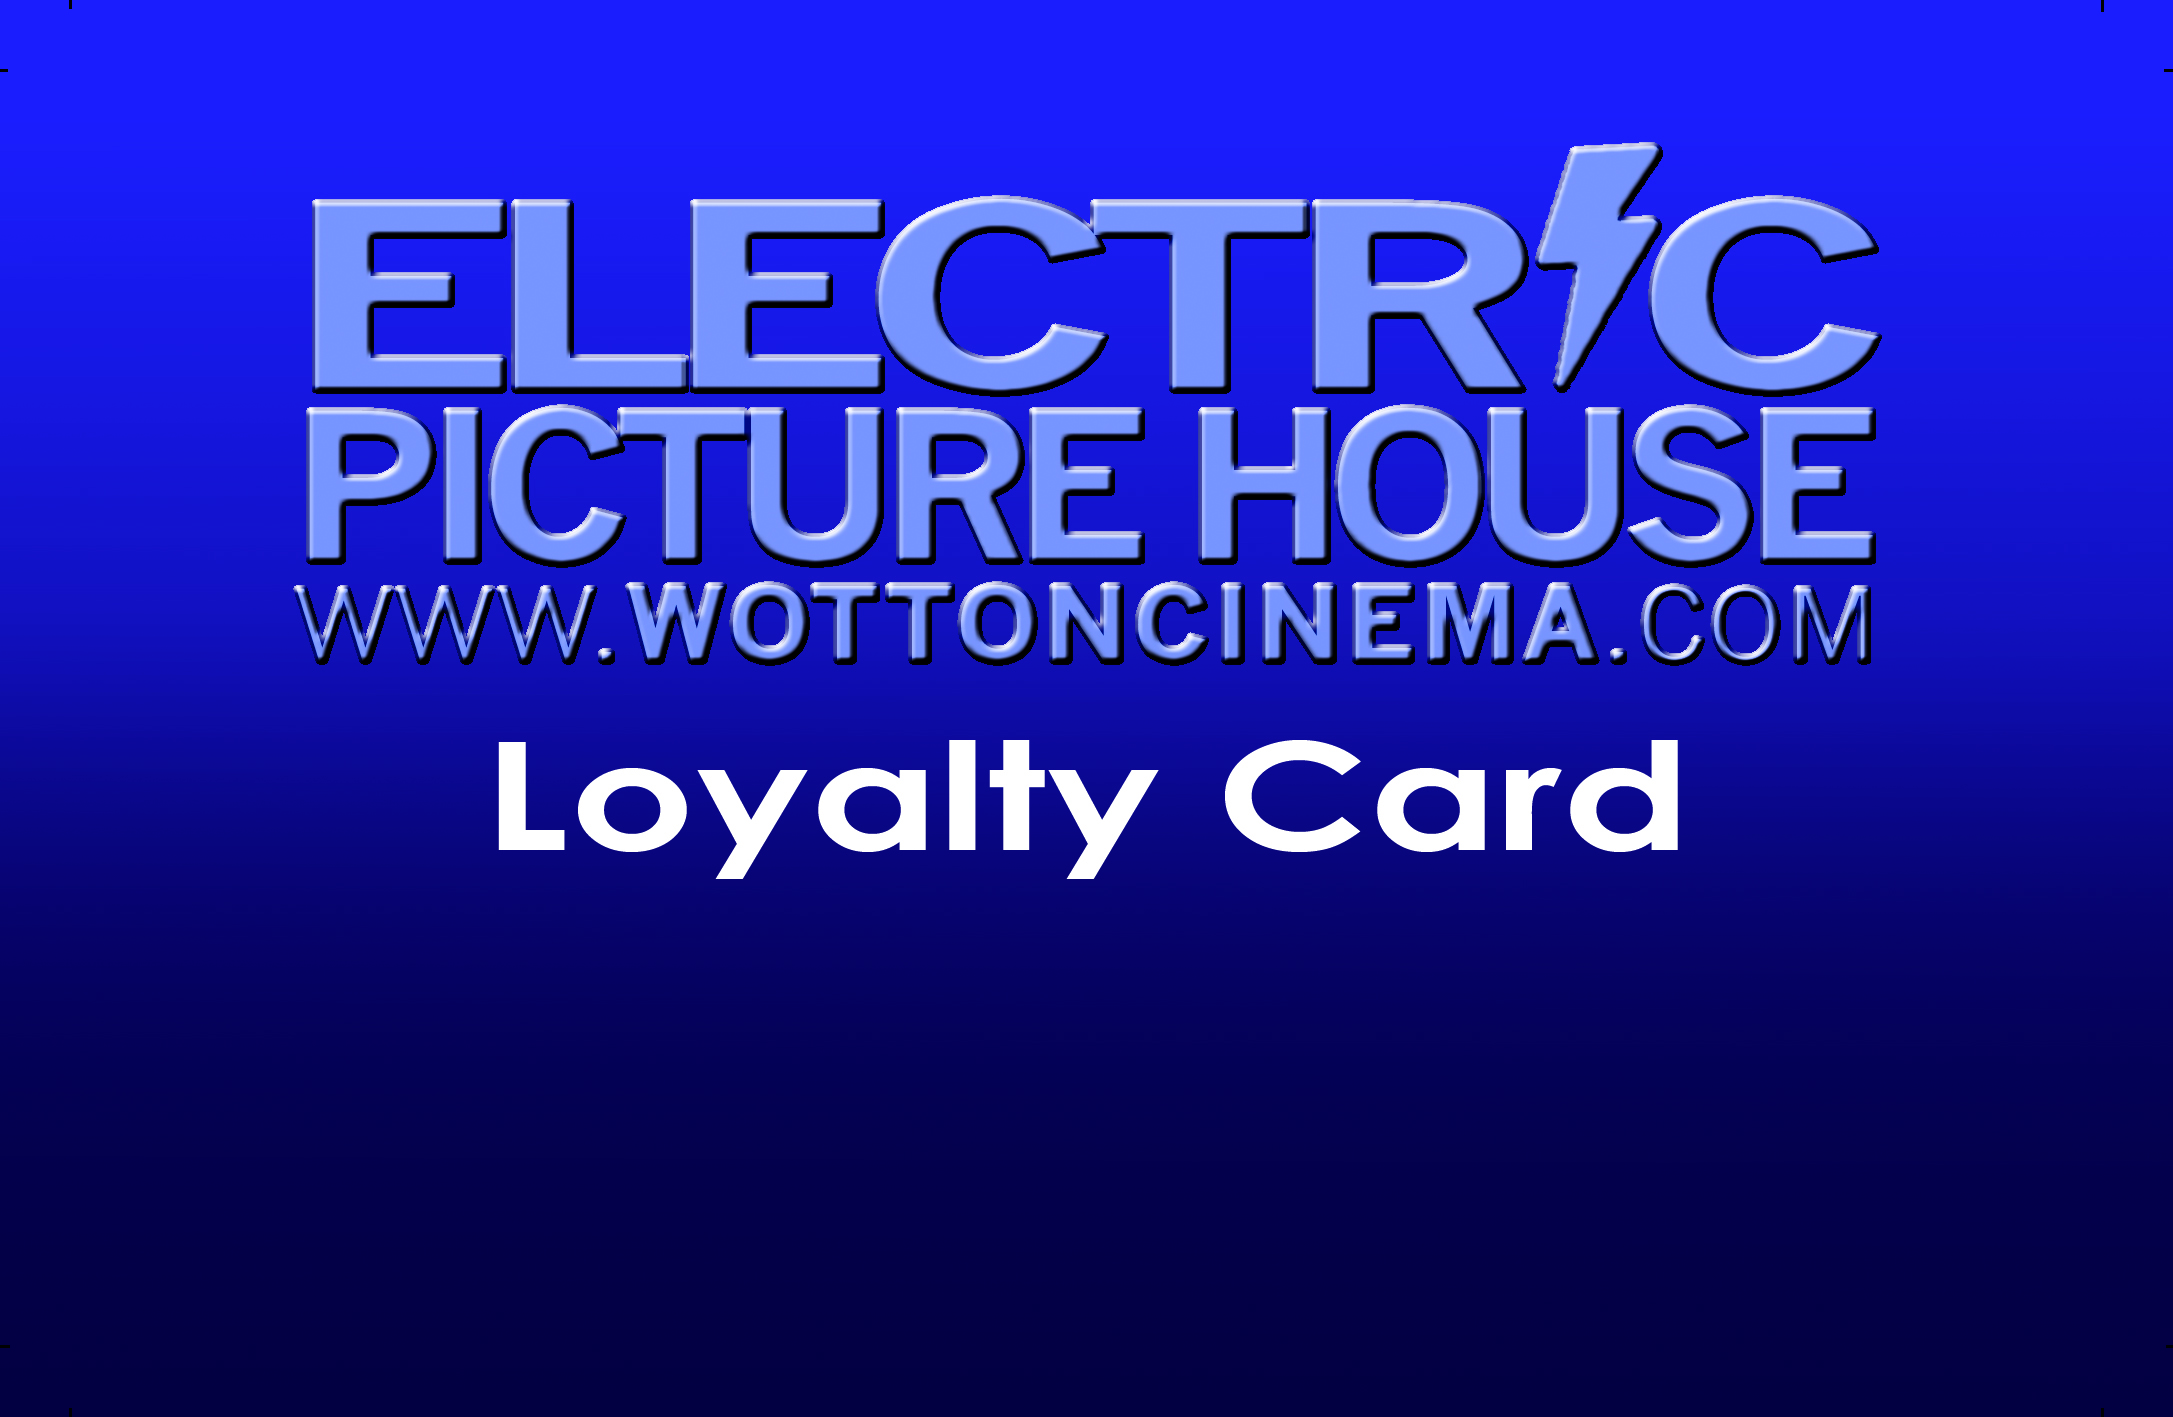 Electric Picture House Cinema Loyalty Card